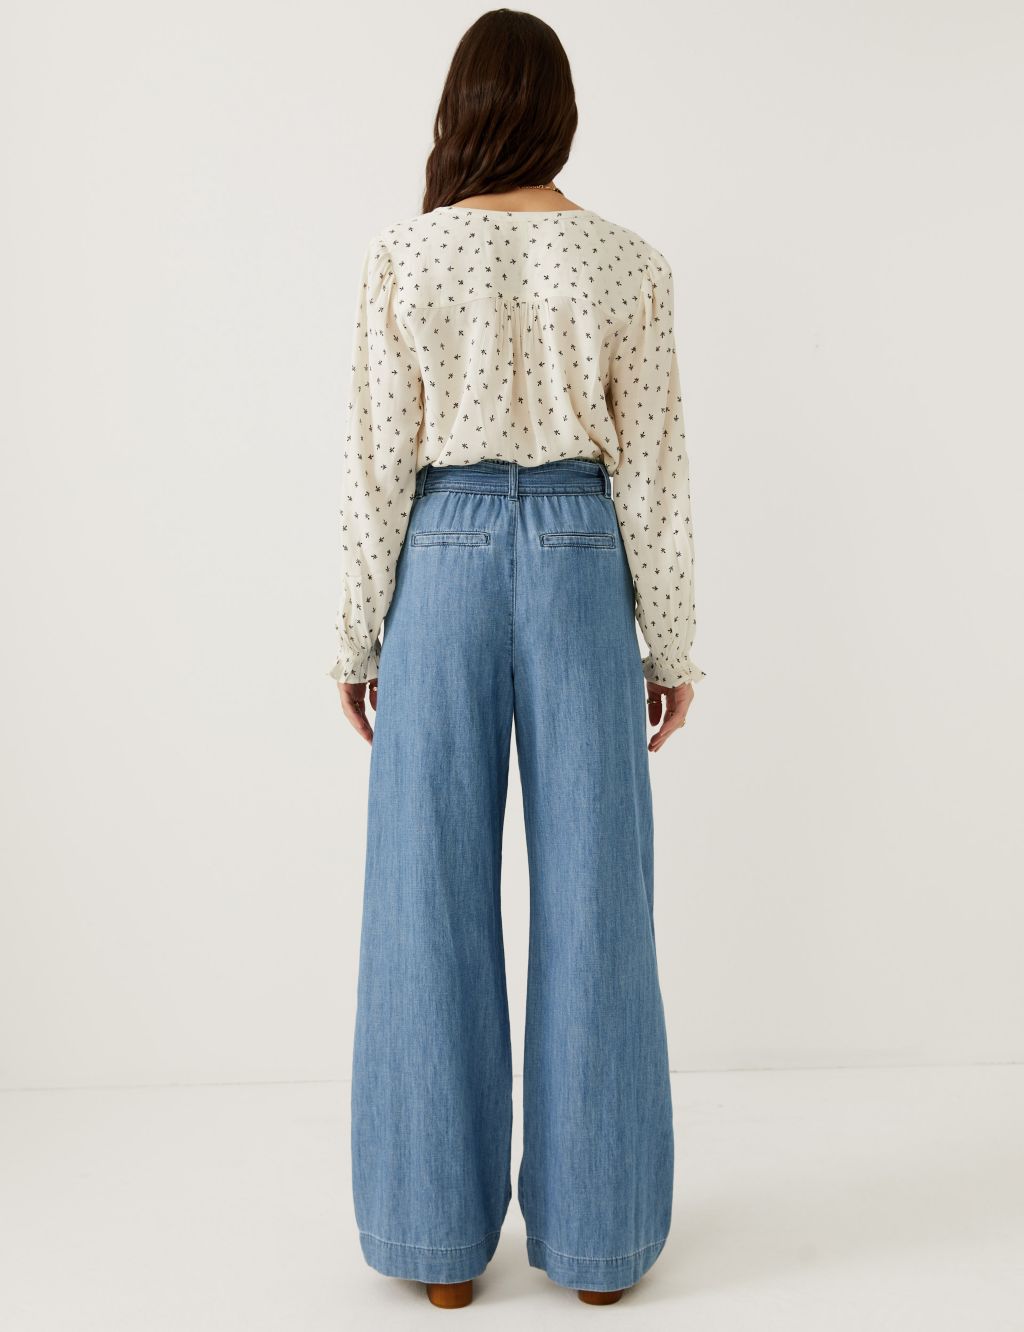 Denim Belted Wide Leg Trousers image 5